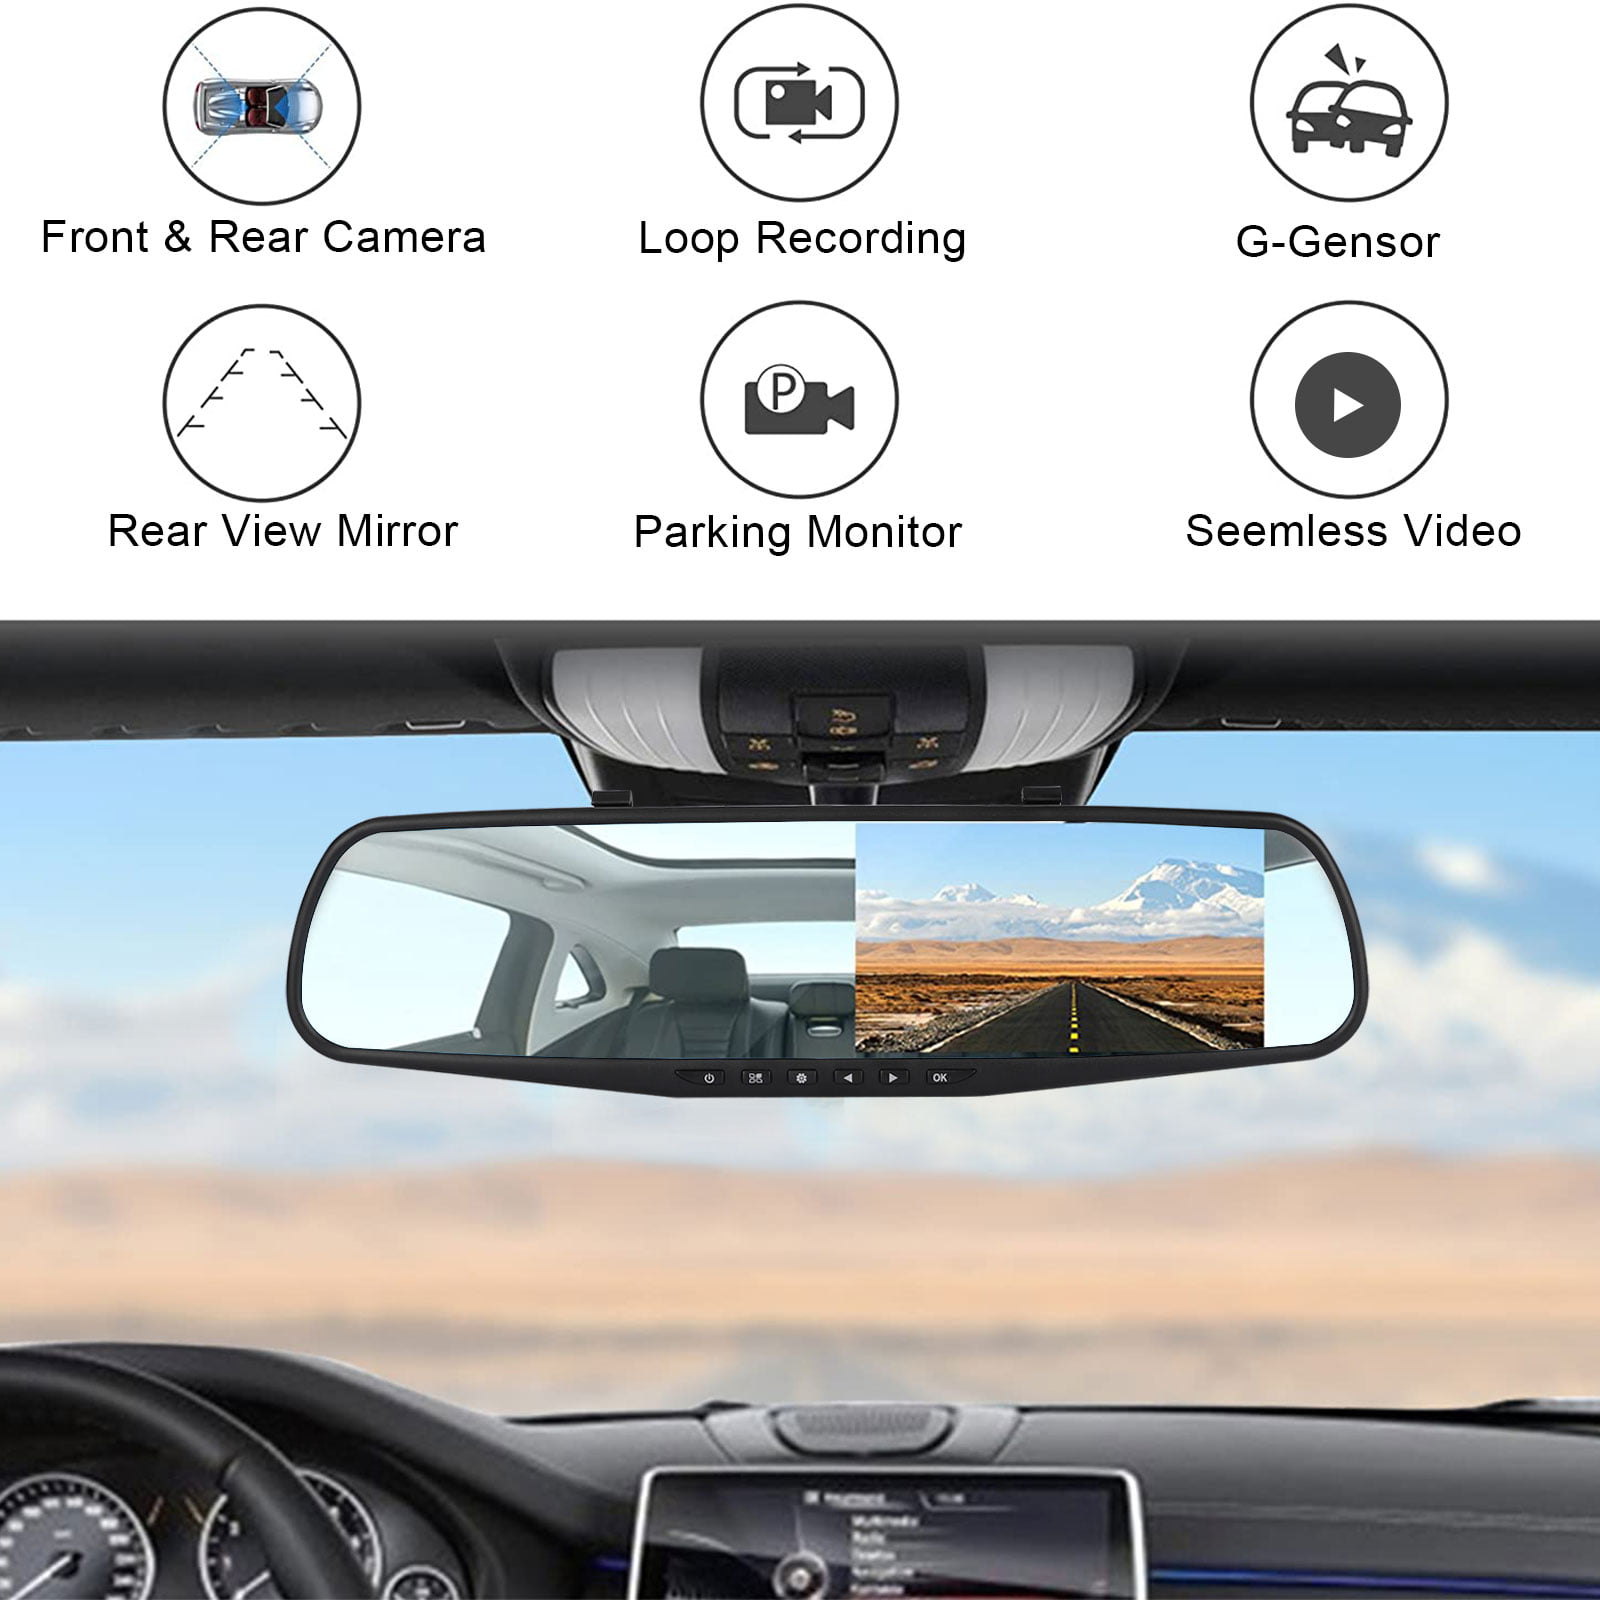 DUTERI D Dash Cam Rear View Mirror Camera Cars Video Backup Parking 24Hs Monitor with Night Vision G-Sensor Waterproof 170°HD 1080P 9.66 Full Size Touch Screen 